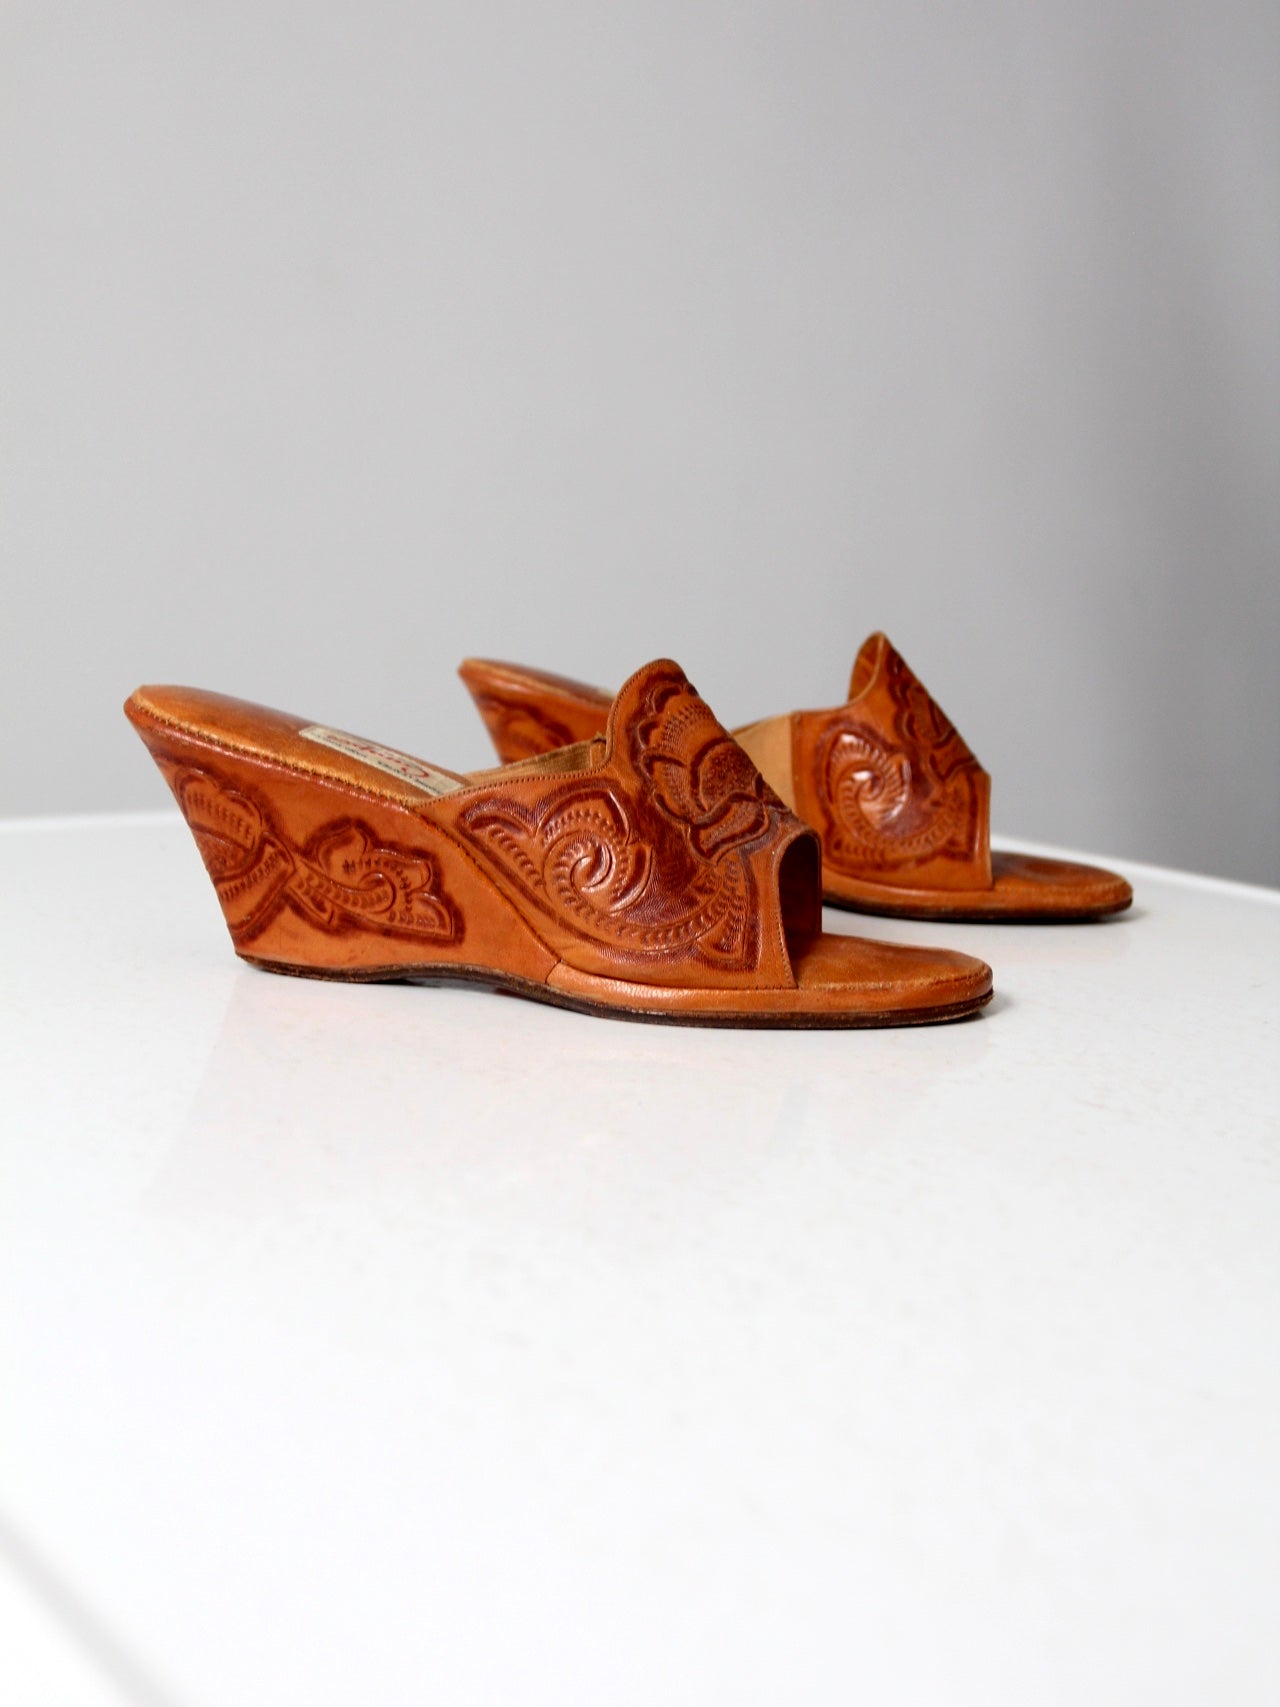 vintage 50s tooled leather wedges